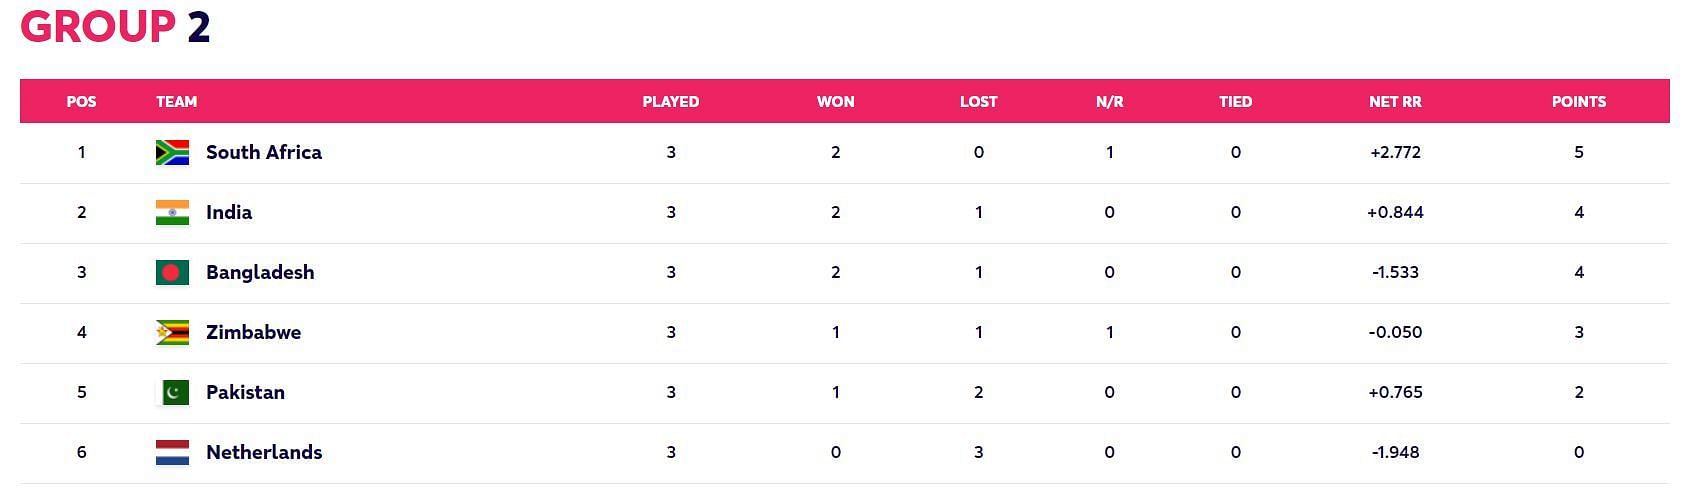 Updated Points Table after Match 30 of T20 World Cup (Image Courtesy: www.t20worldcup.com)